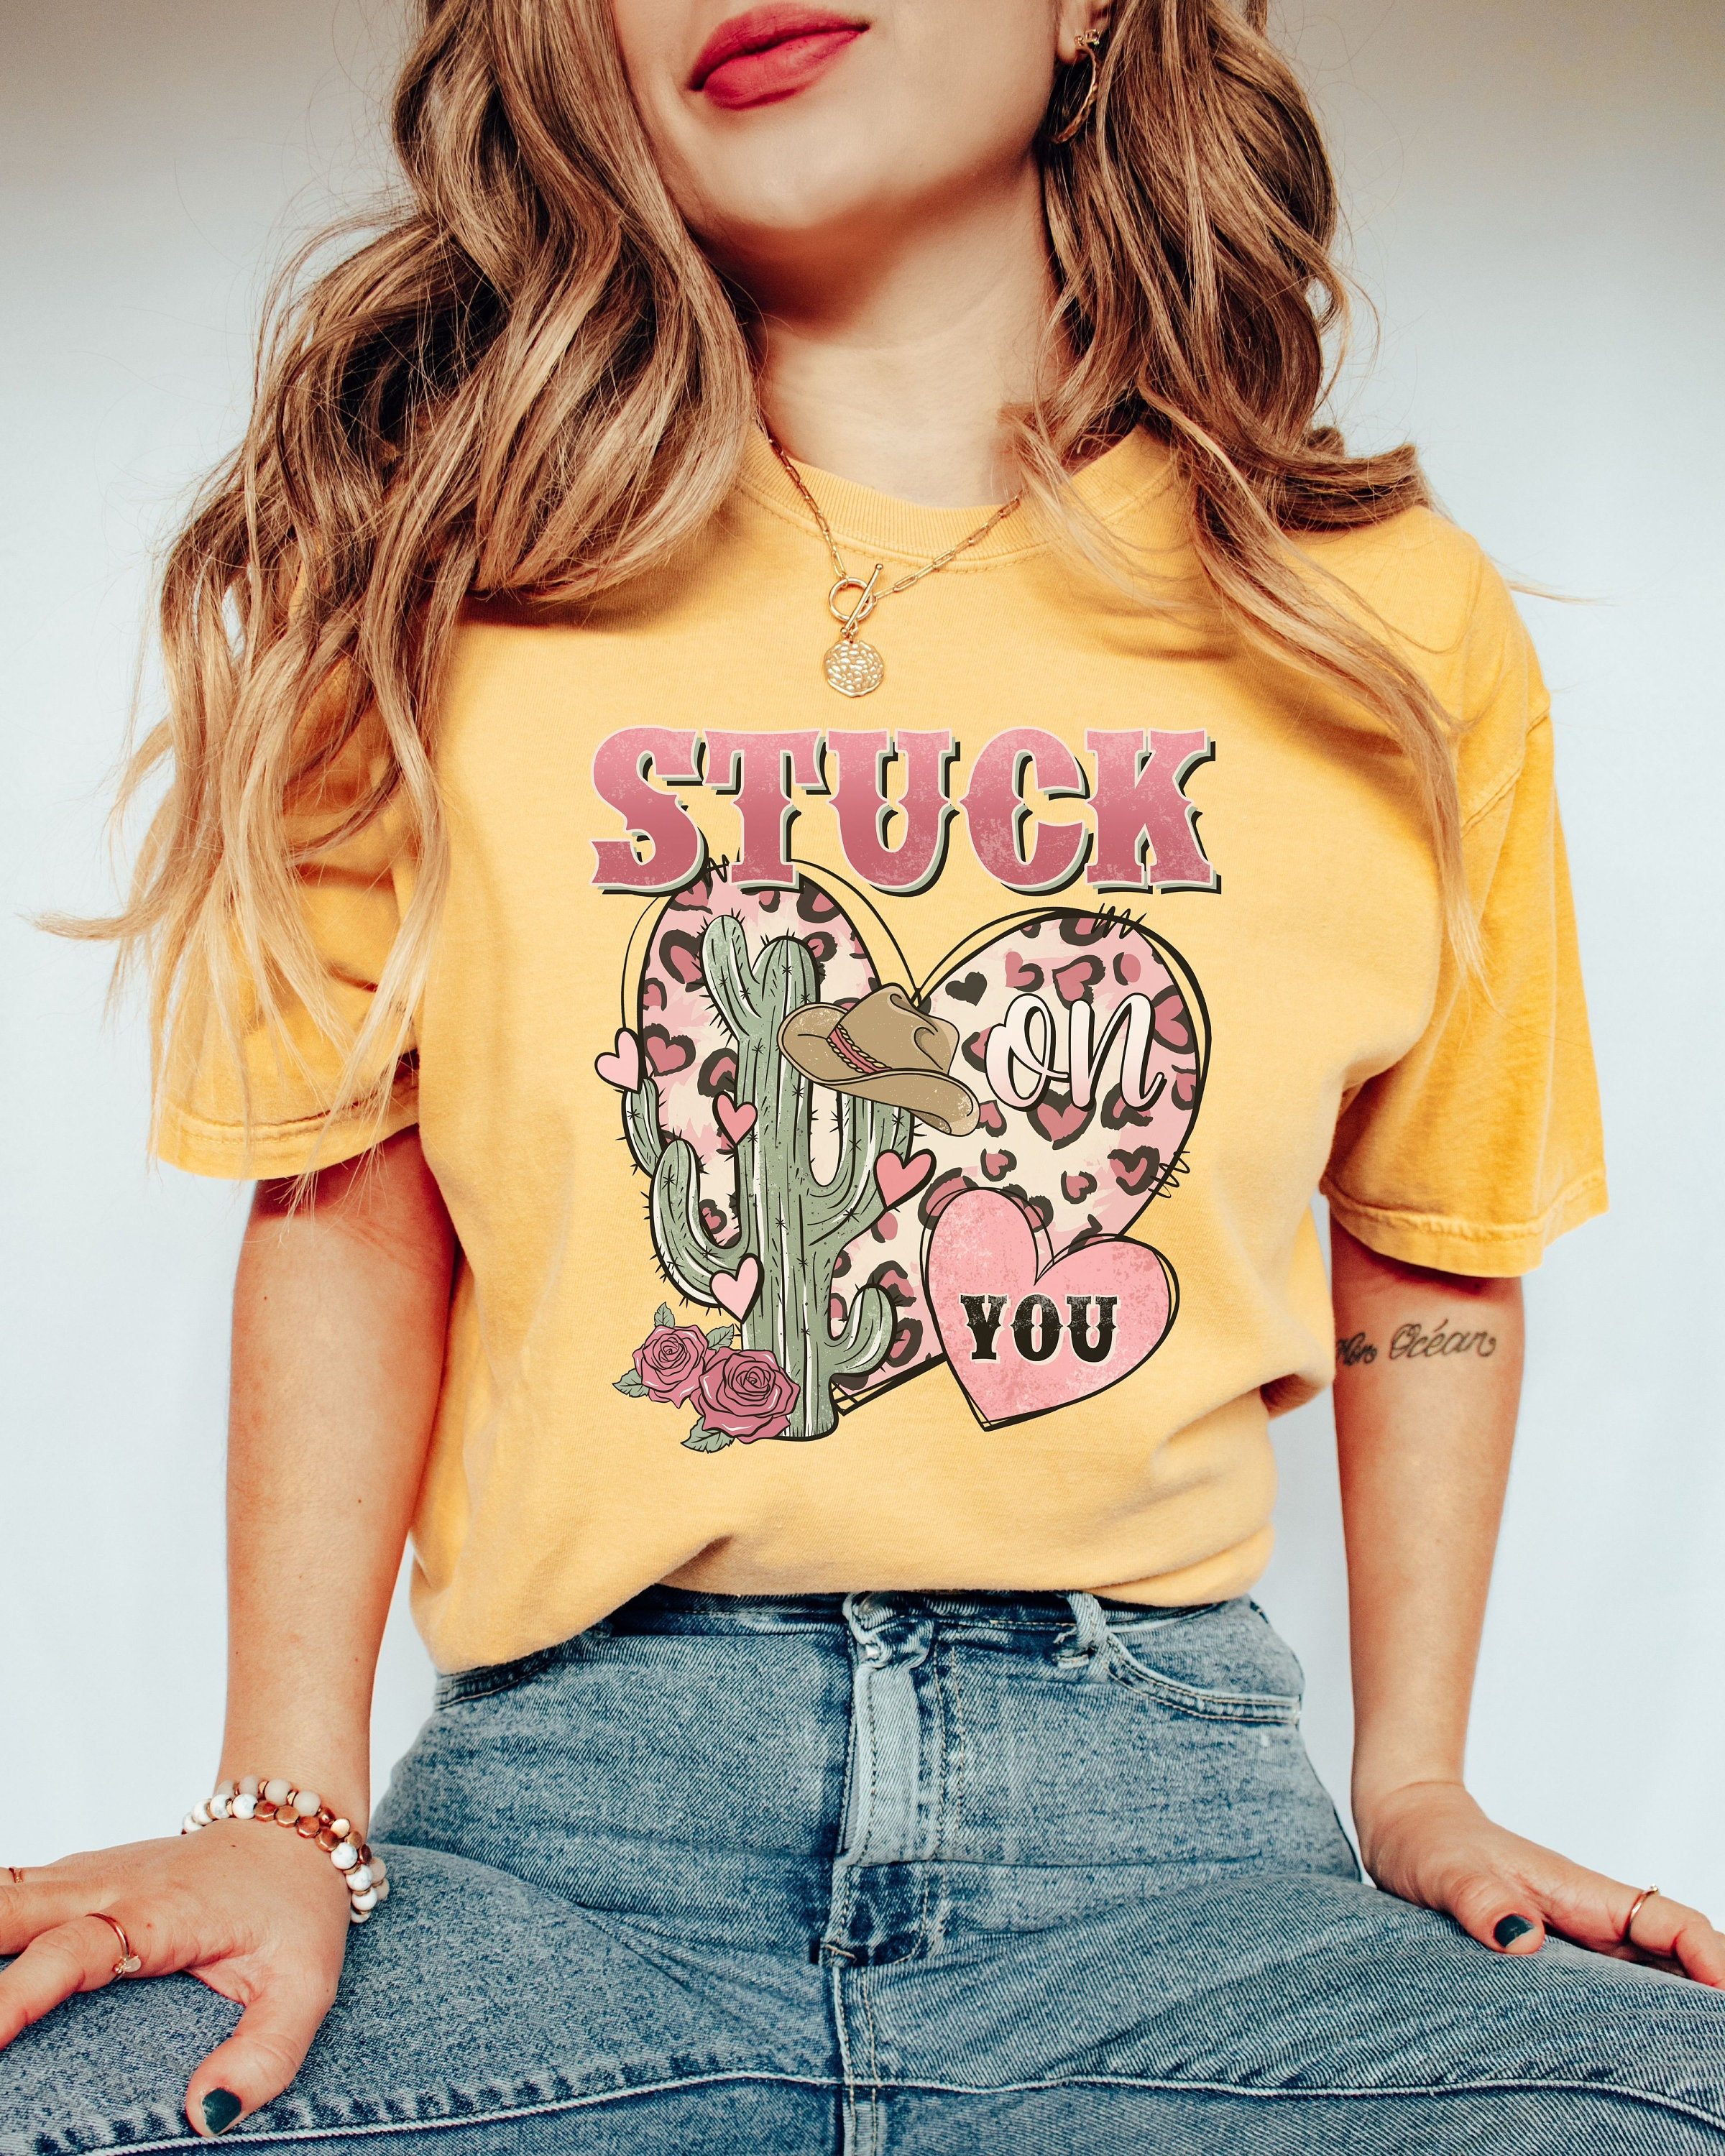 Stuck on You Lyrics, Stuck on You Till The End of Time, Valentines Day  Special Gift,  Kids T-Shirt for Sale by graphic-genie